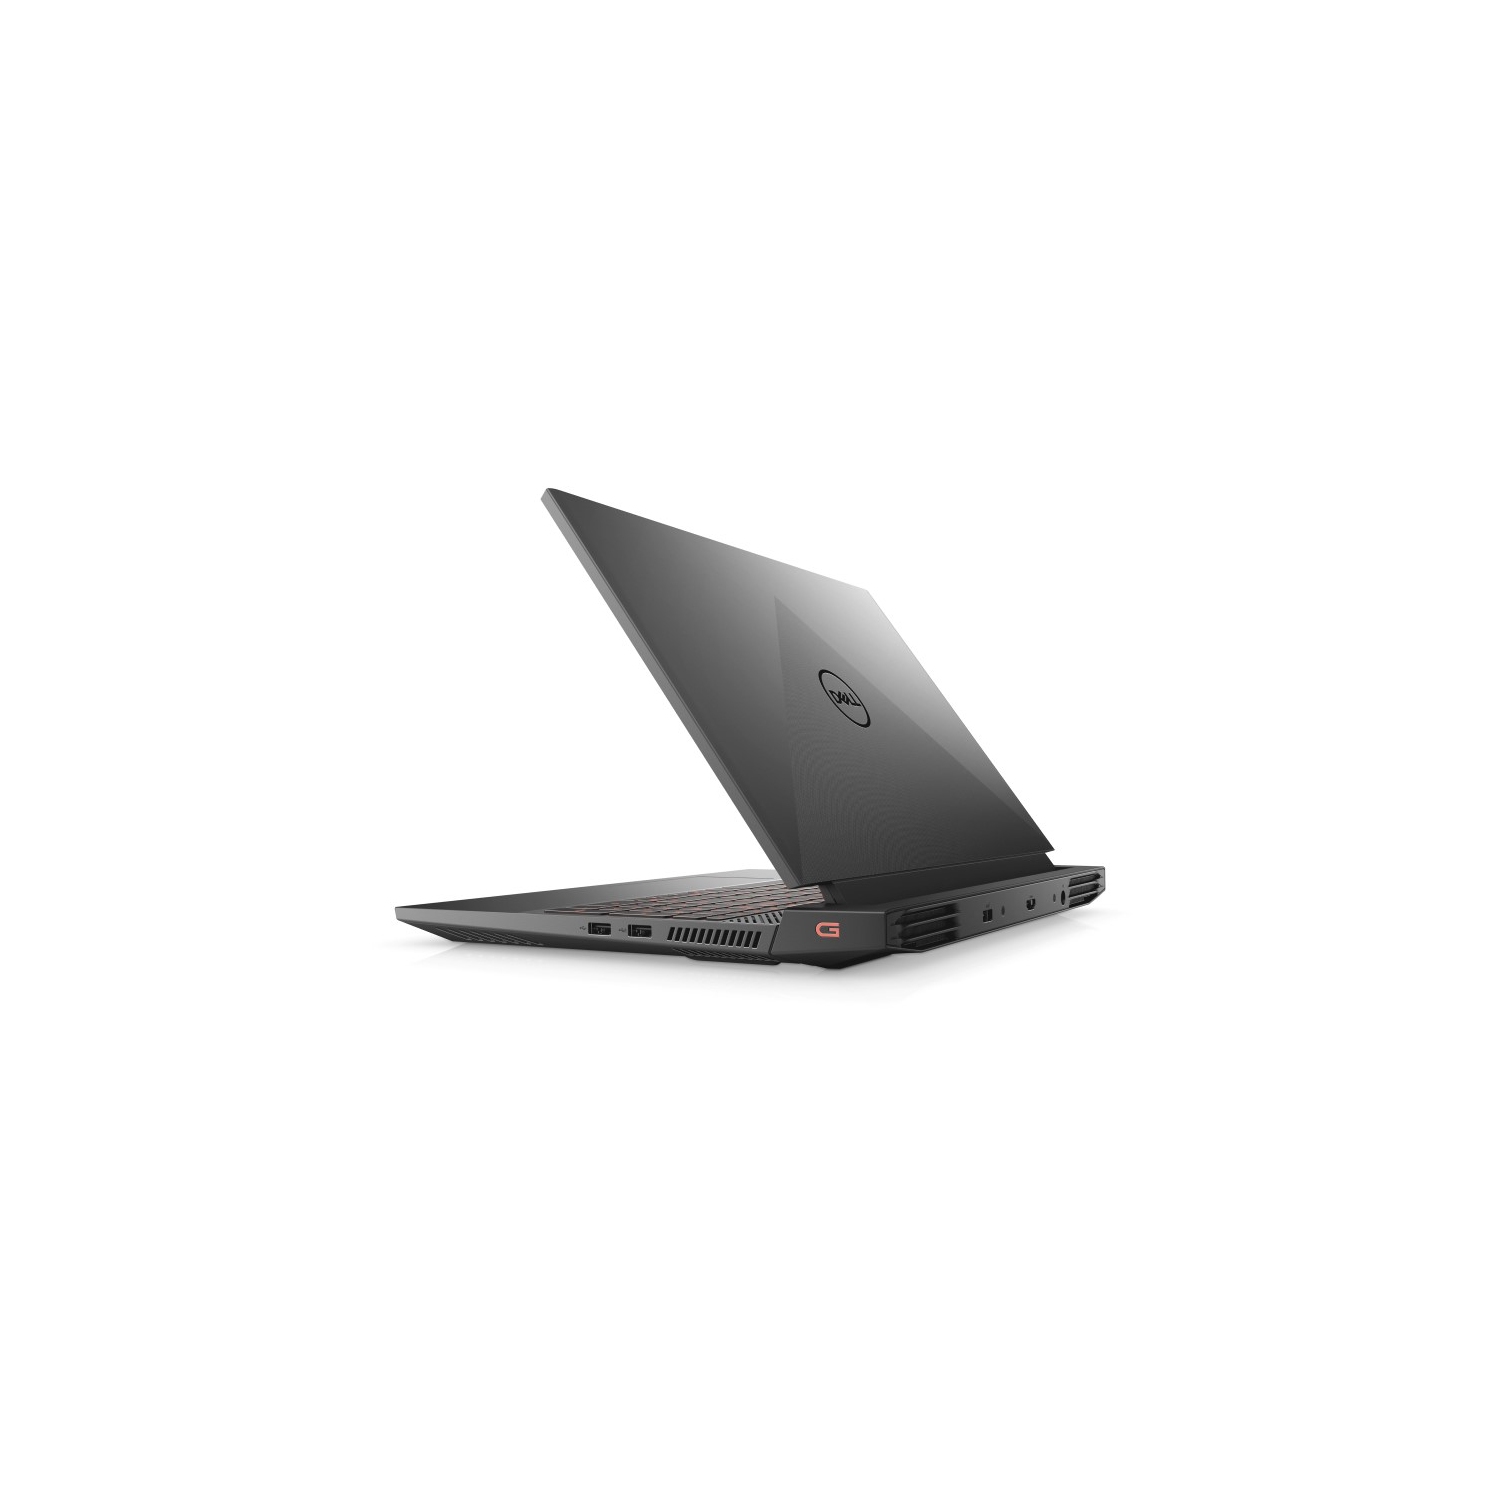 Refurbished (Excellent) - Dell G15 5511 (Gaming) Laptop 15" - Nvidia RTX 3060 - Intel i7-11800H - 16GB RAM - 1TB SSD - WIN 10 Home - Certified Refurbished